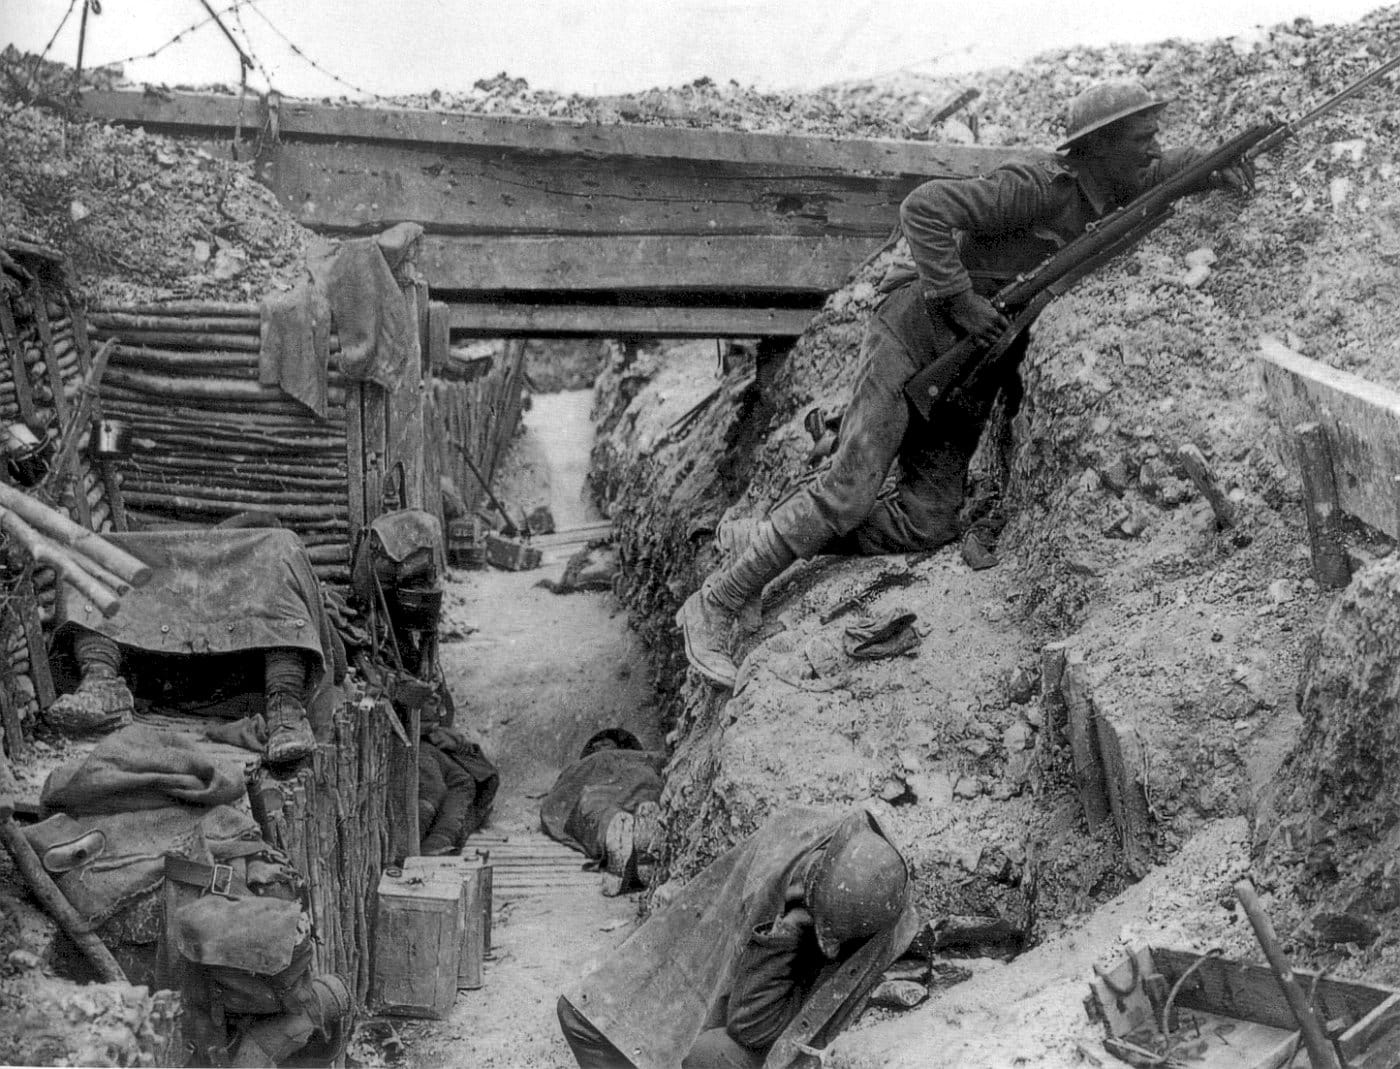 A German trench occupied by British soldiers from the Chesire Regiment near Albert-Bapaume road at Ovillers-la-Boisselle, July 1916, Battle of the Somme